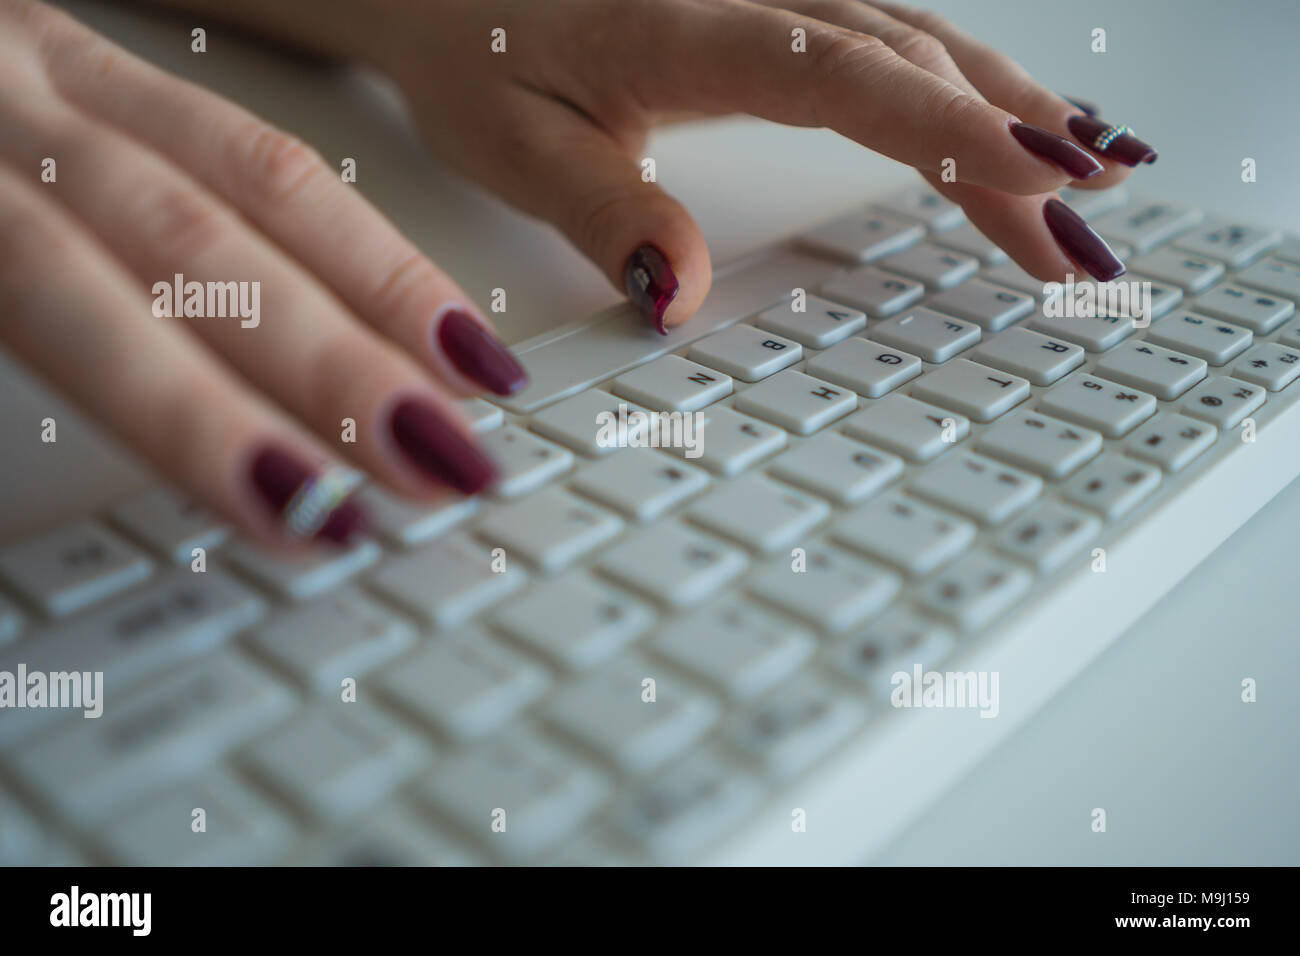 A woman is typing a message on a computer keyboard close-up Stock Photo